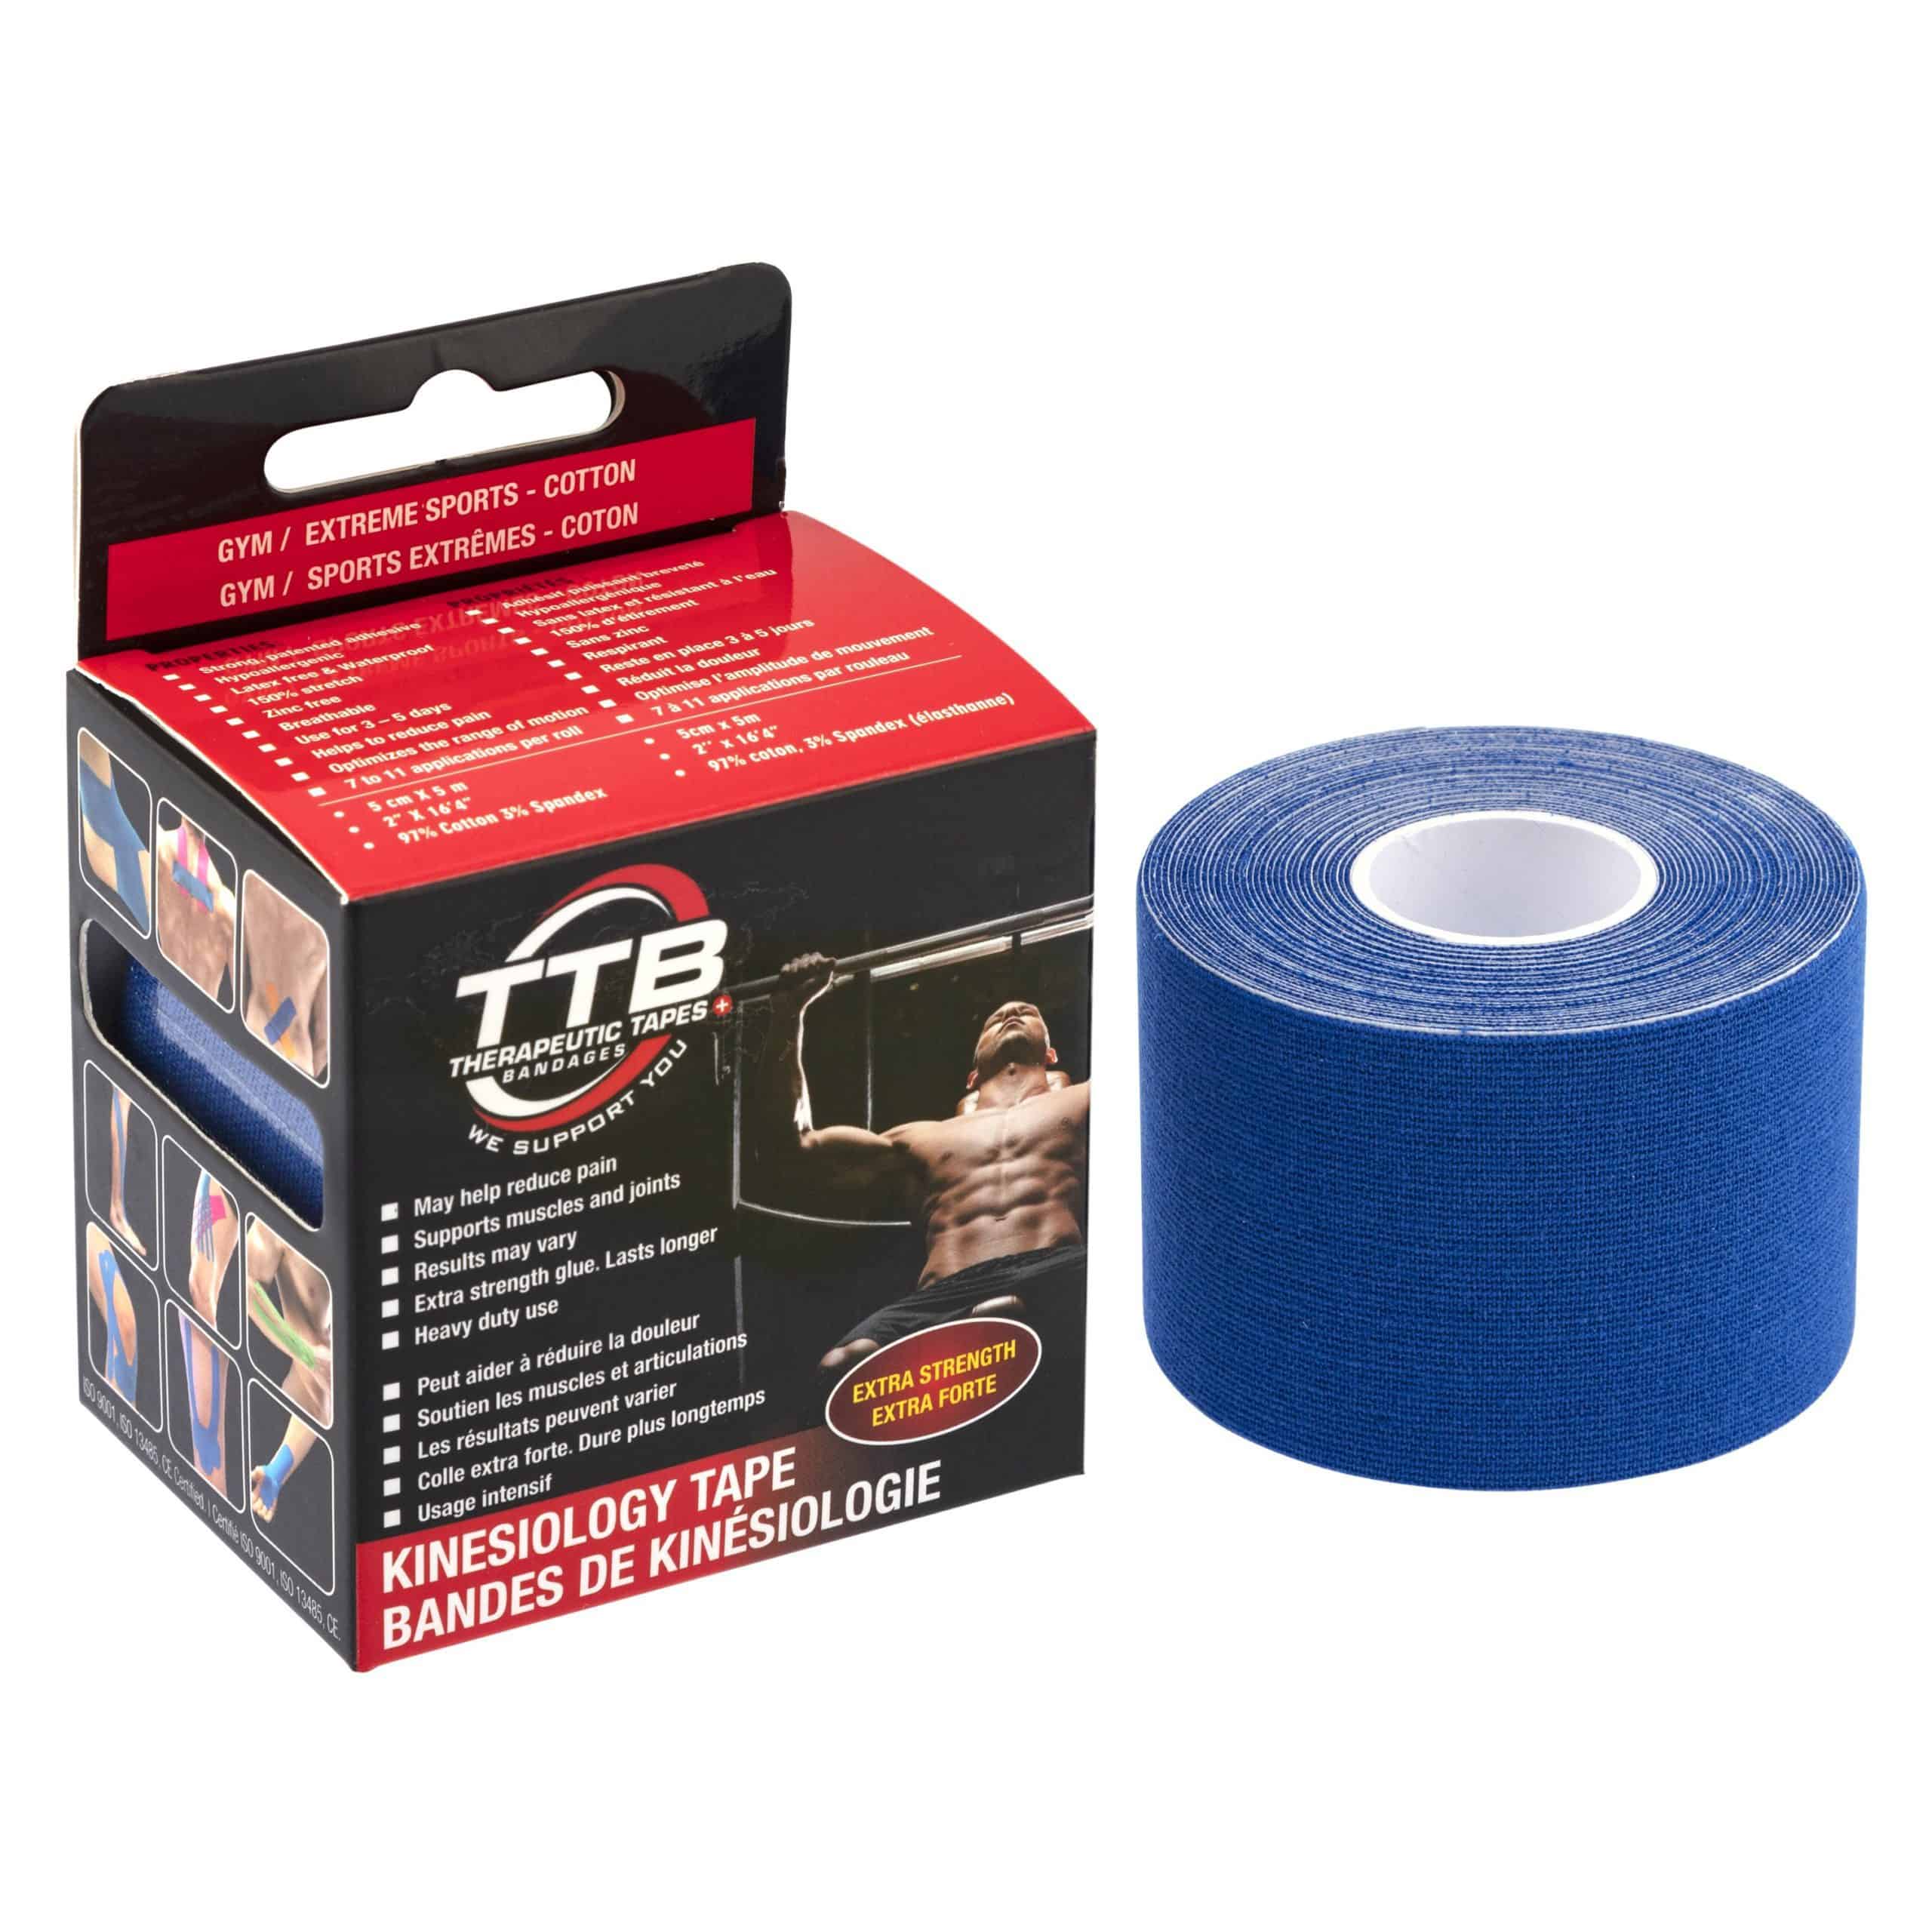 Gym Use/Extreme Sports Kinesiology Tape (Cotton) - EXTREME STRENGTH